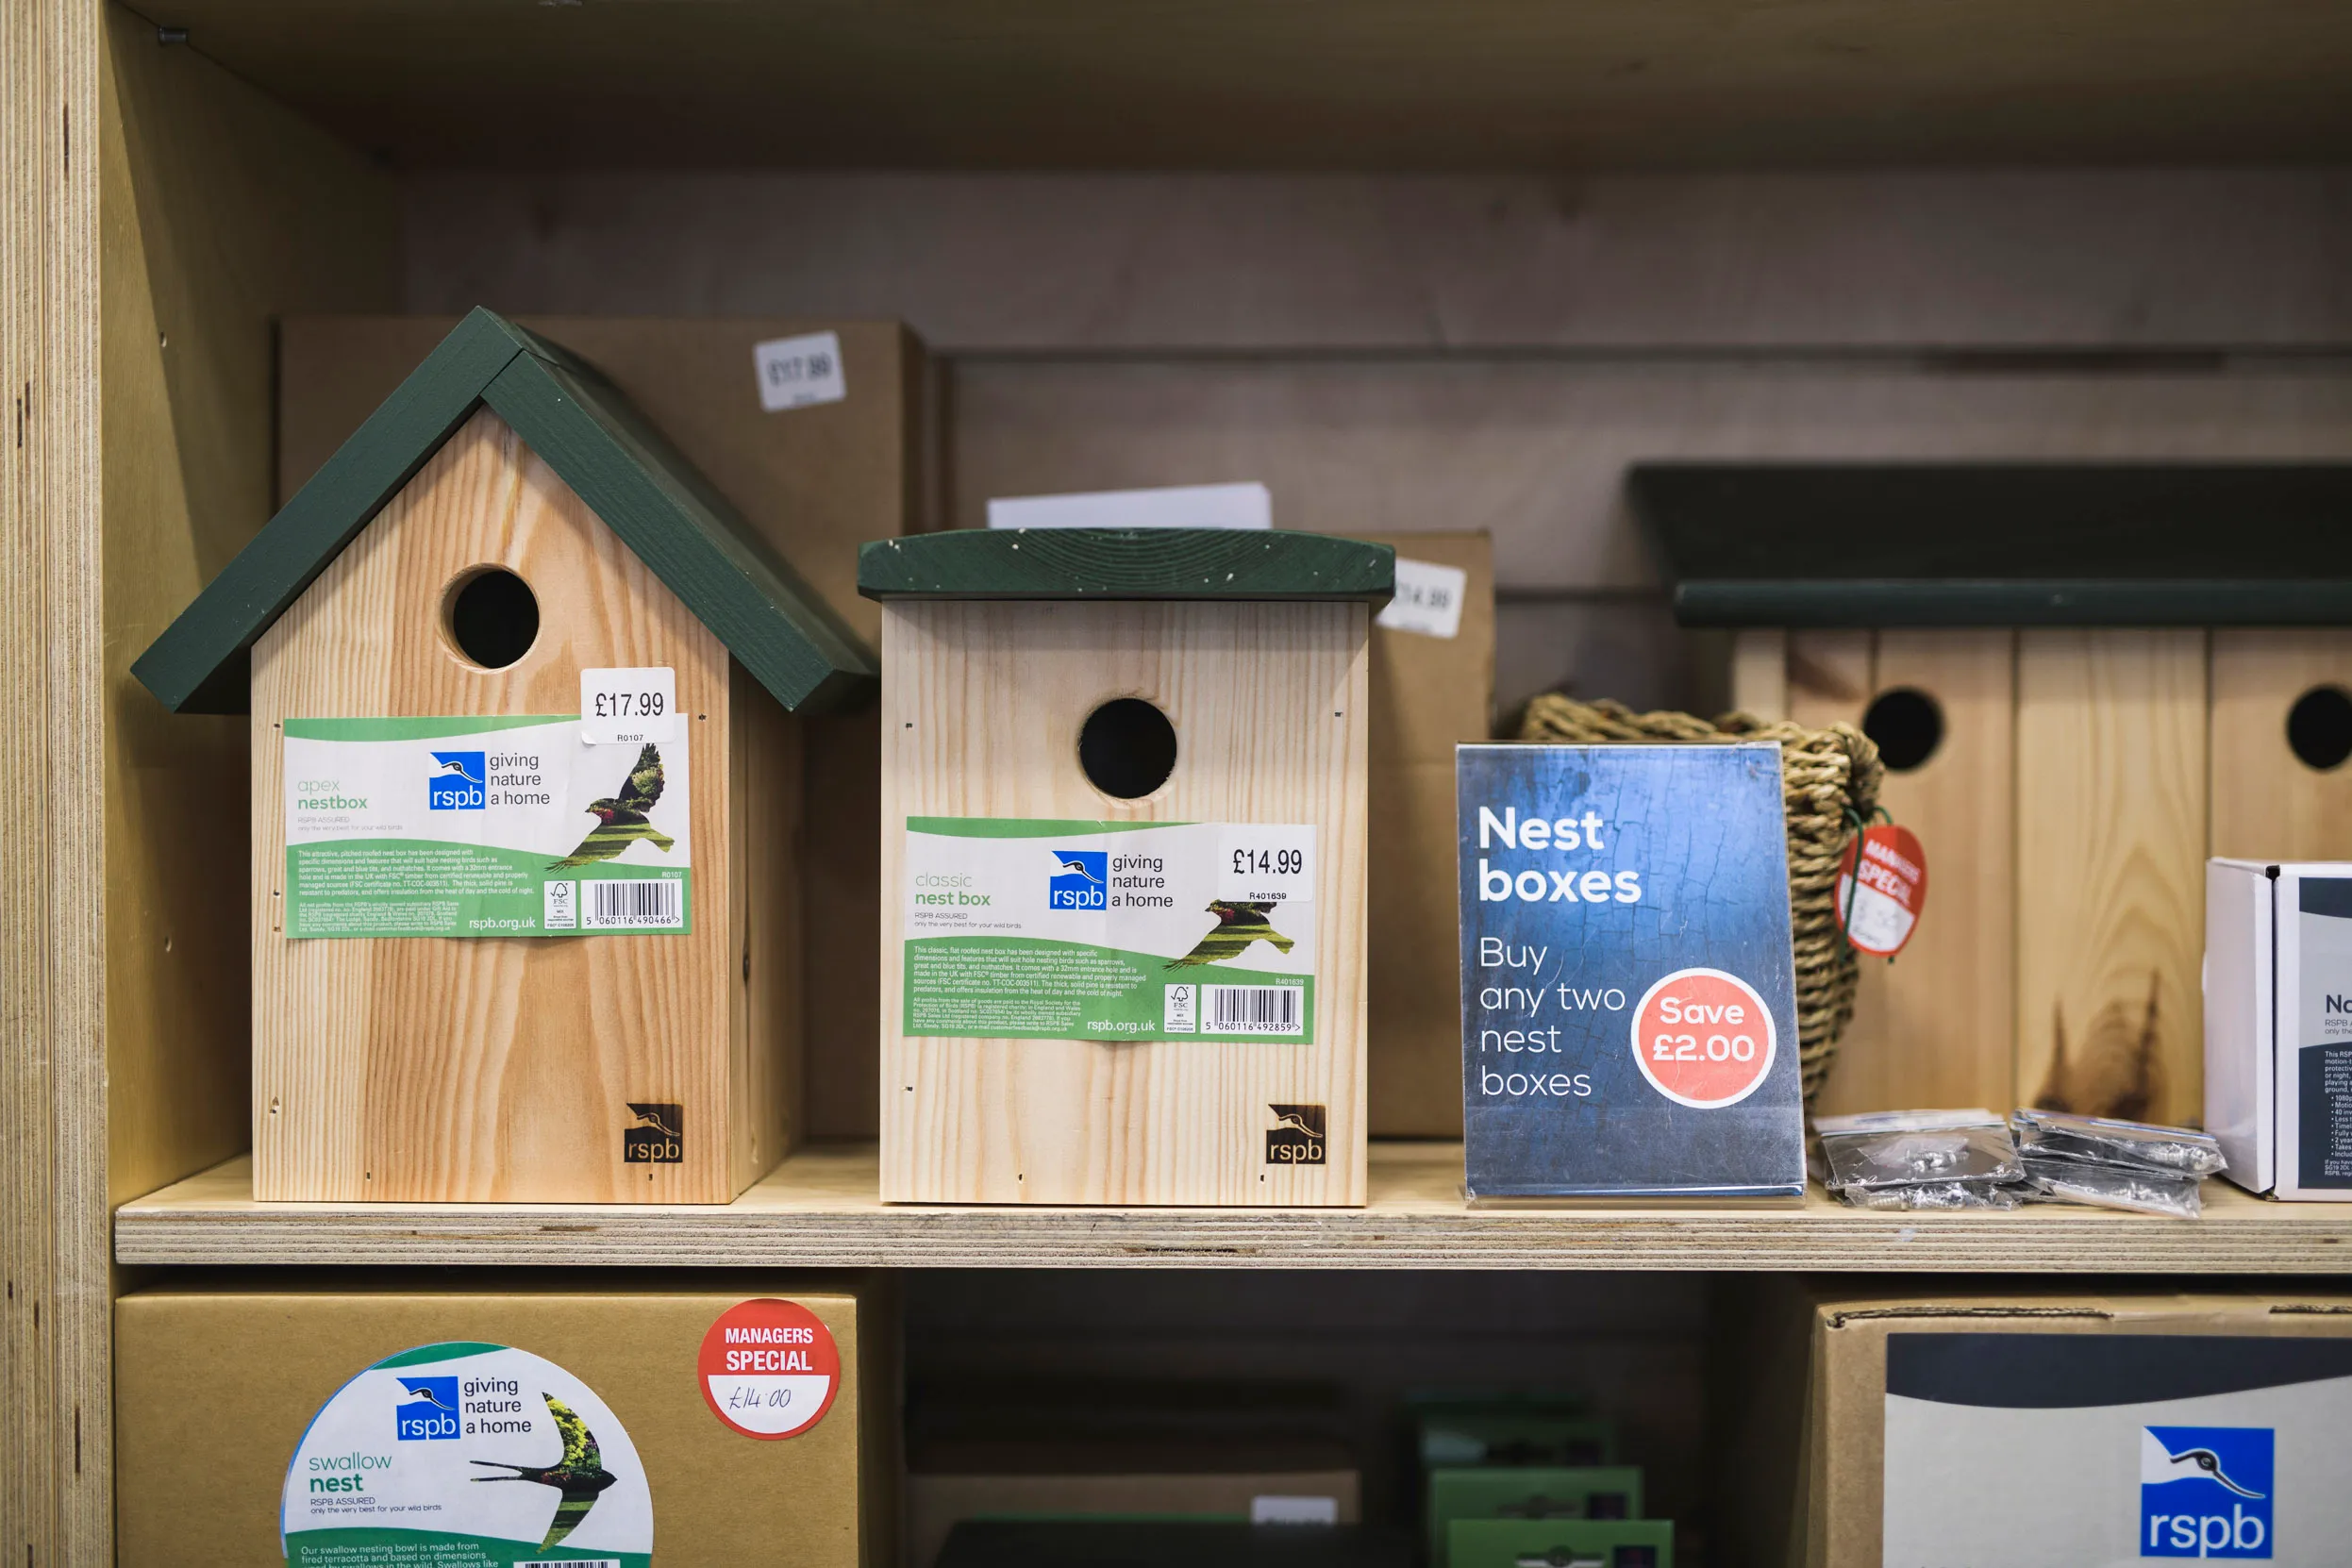 Close up of bird and nest boxes on an in store display.